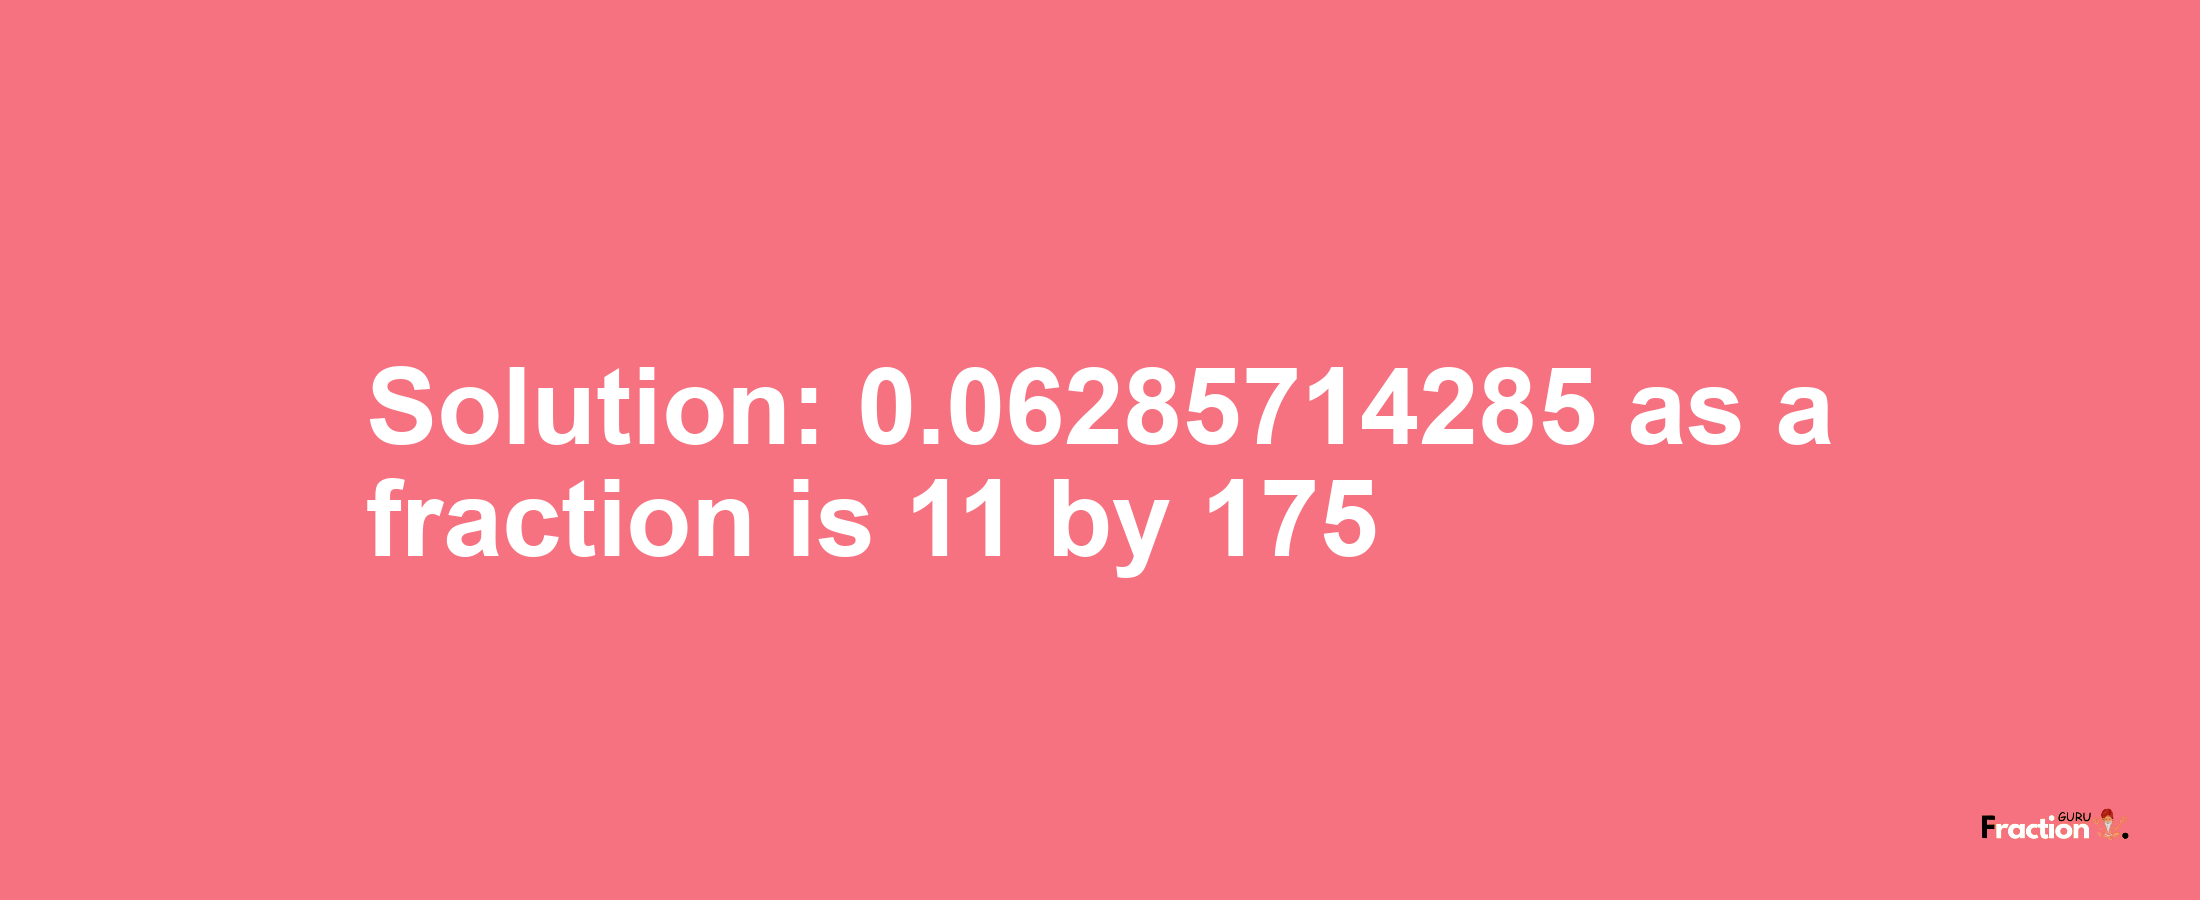 Solution:0.06285714285 as a fraction is 11/175